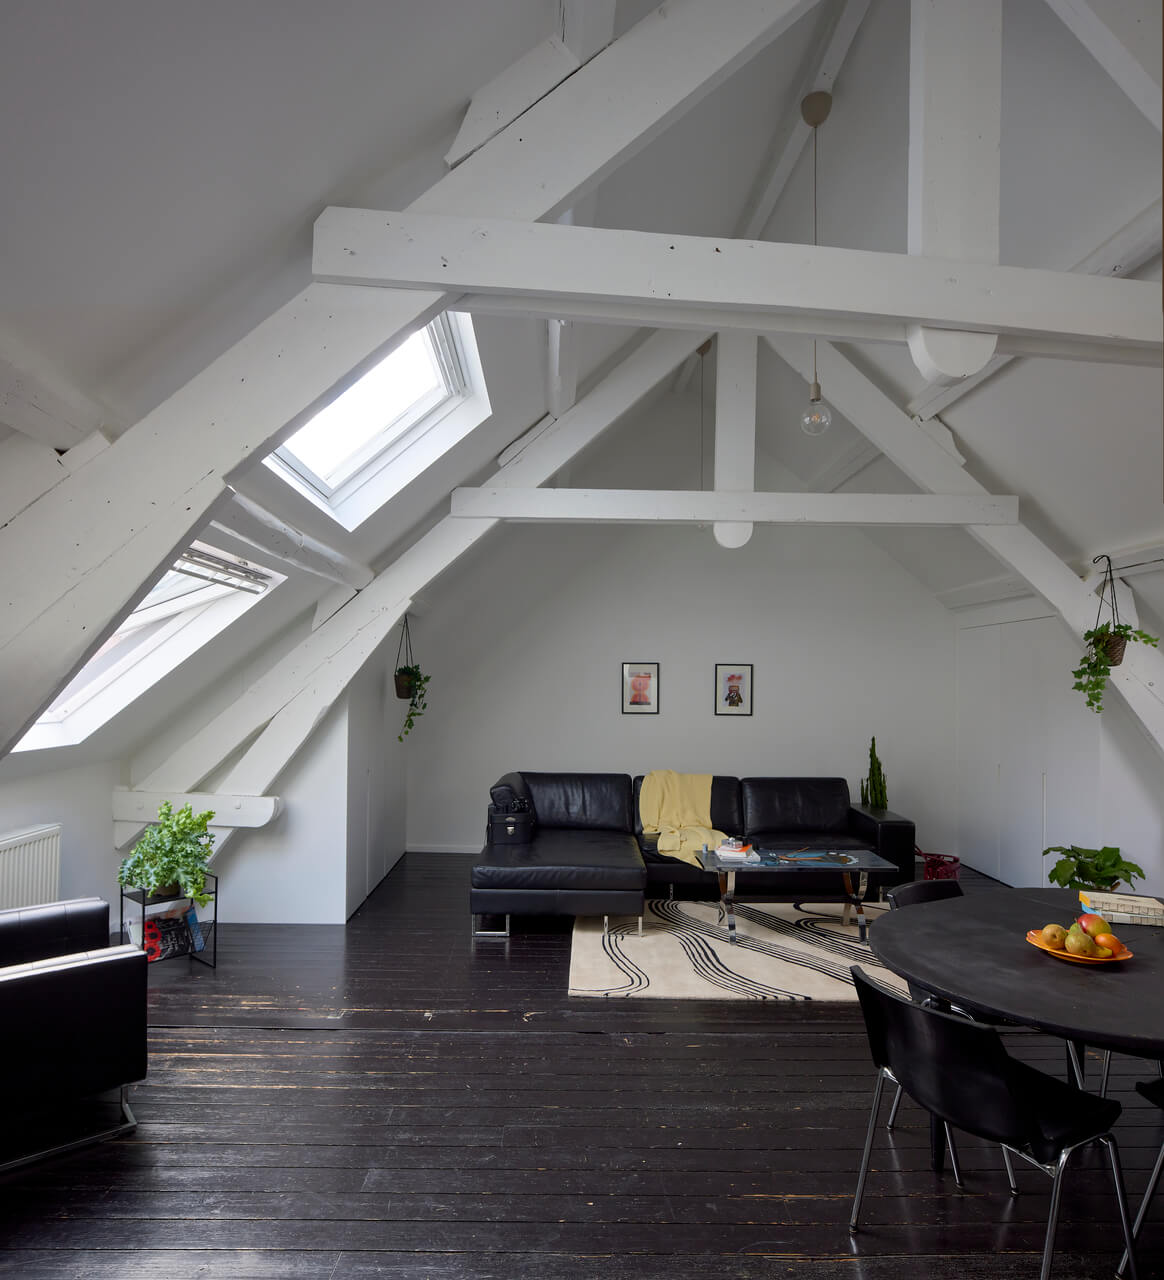 A living room in the attic.